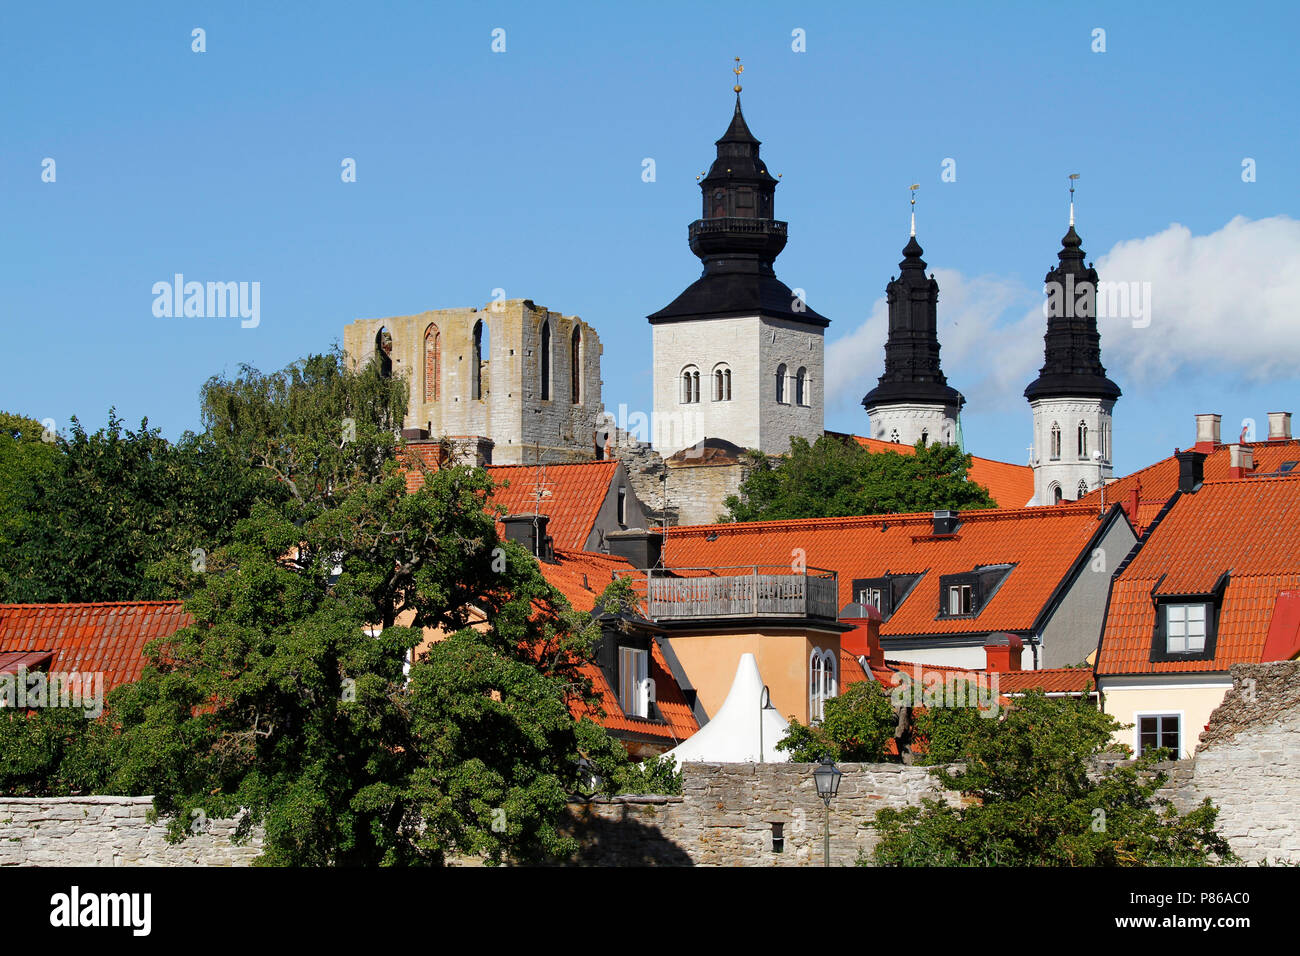 Towers of the Visby cathedral over the roof tops of medieval hanseatic town in Gotland Island, Sweden. Stock Photo